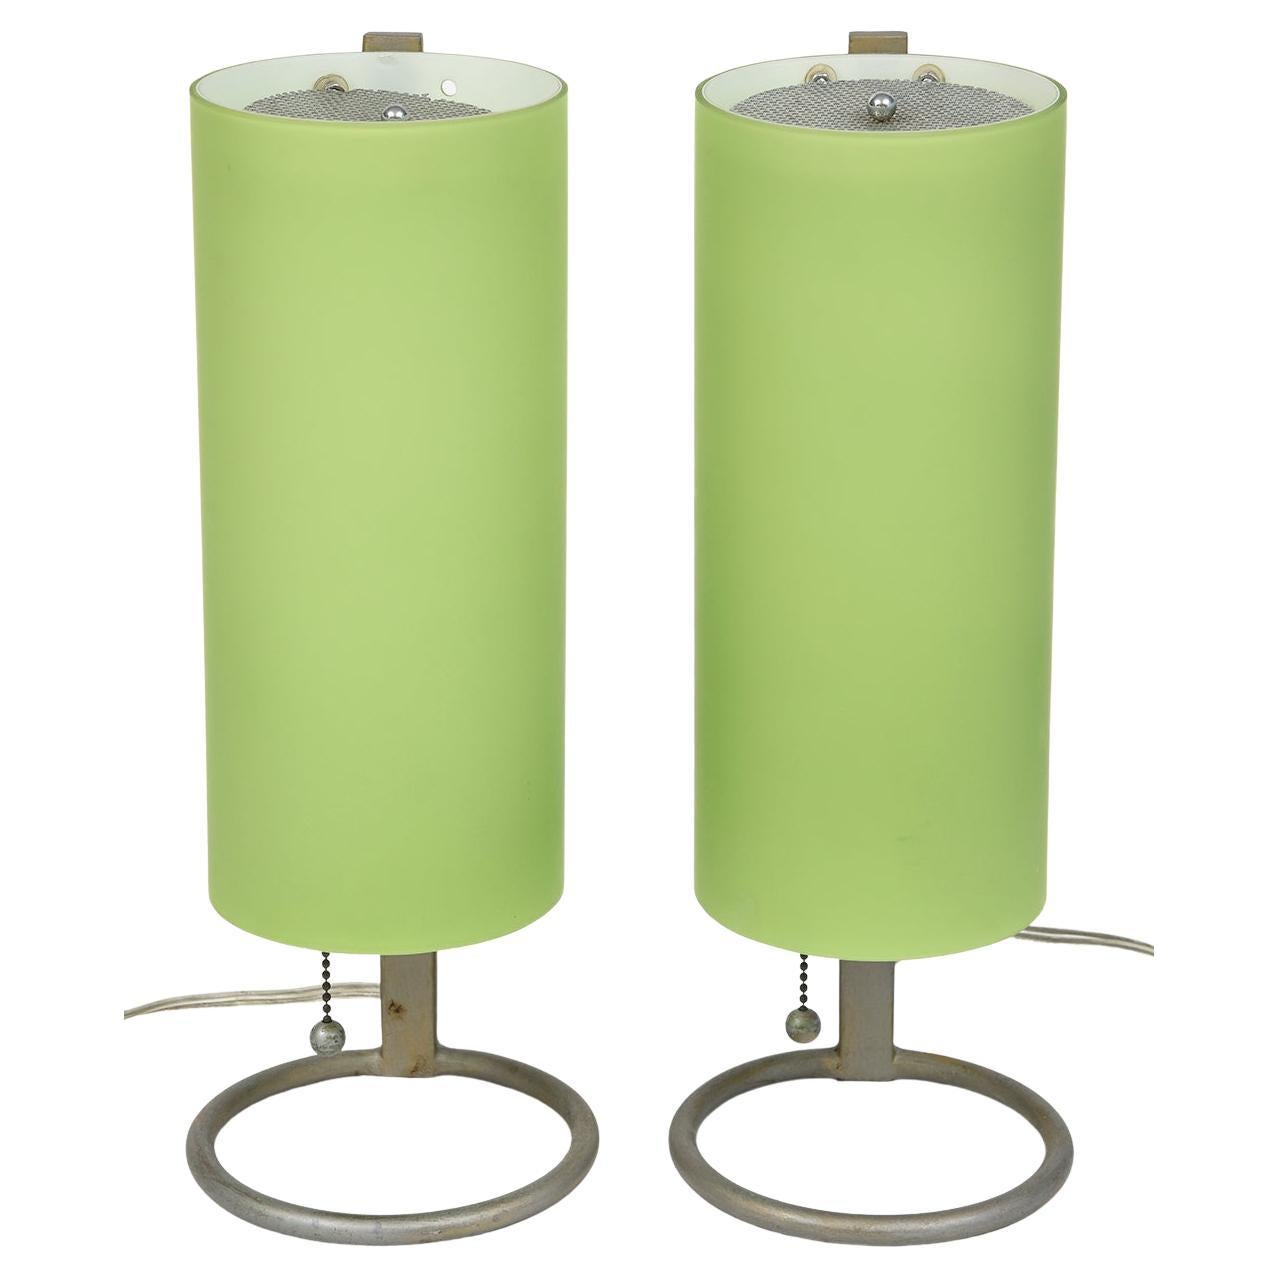 Pair of 1950s Lamps from the Historic Fontainebleau Hotel in Miami Beach